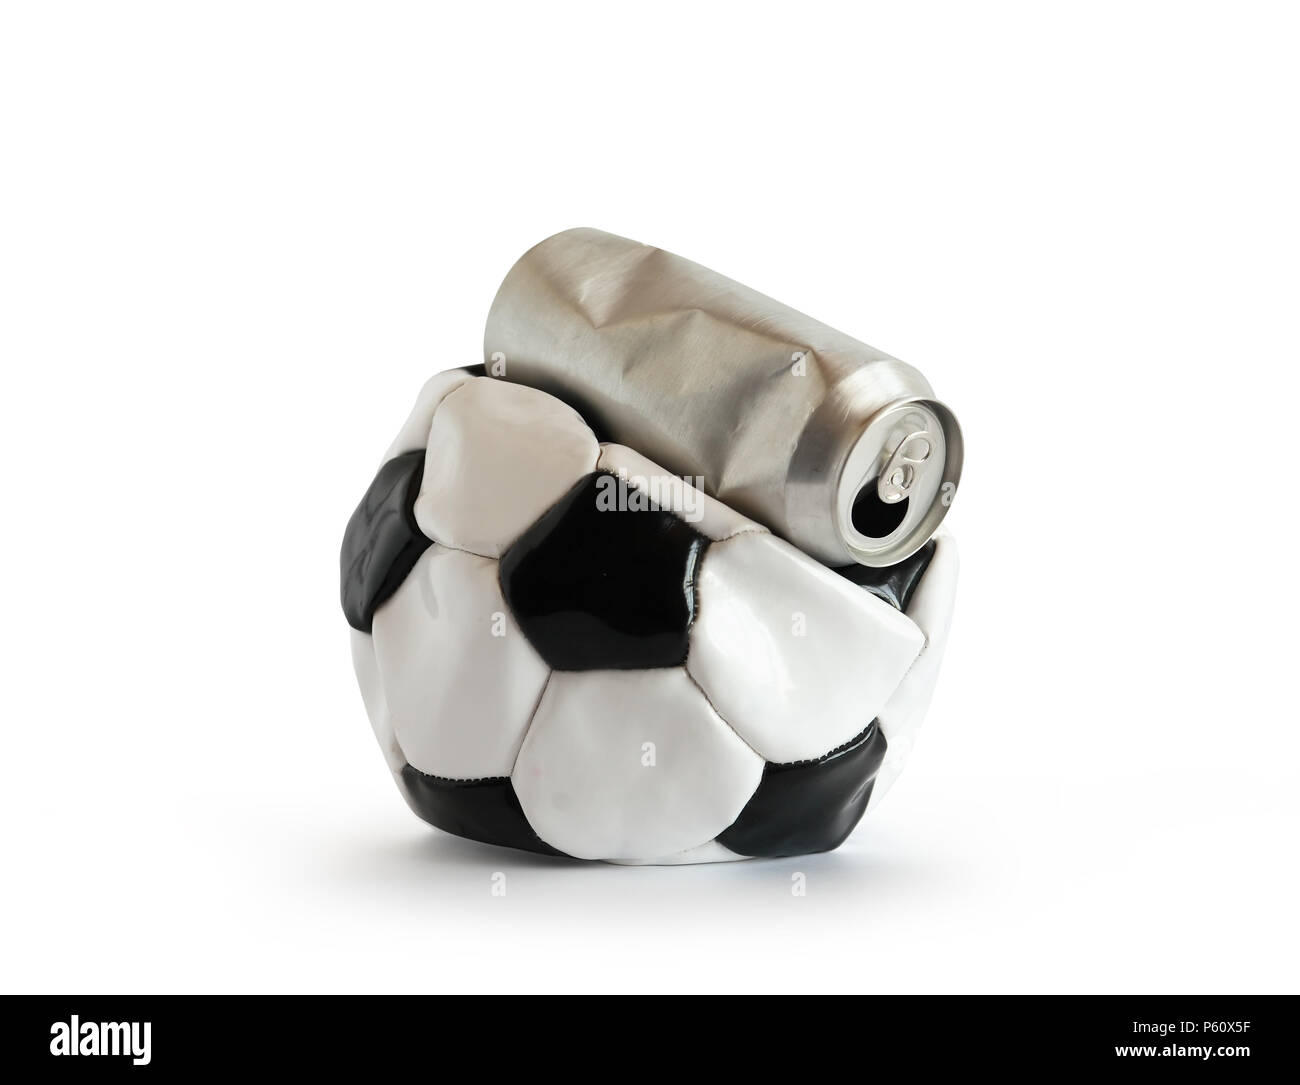 Fan football concept. Empty beer can on deflated ball Stock Photo